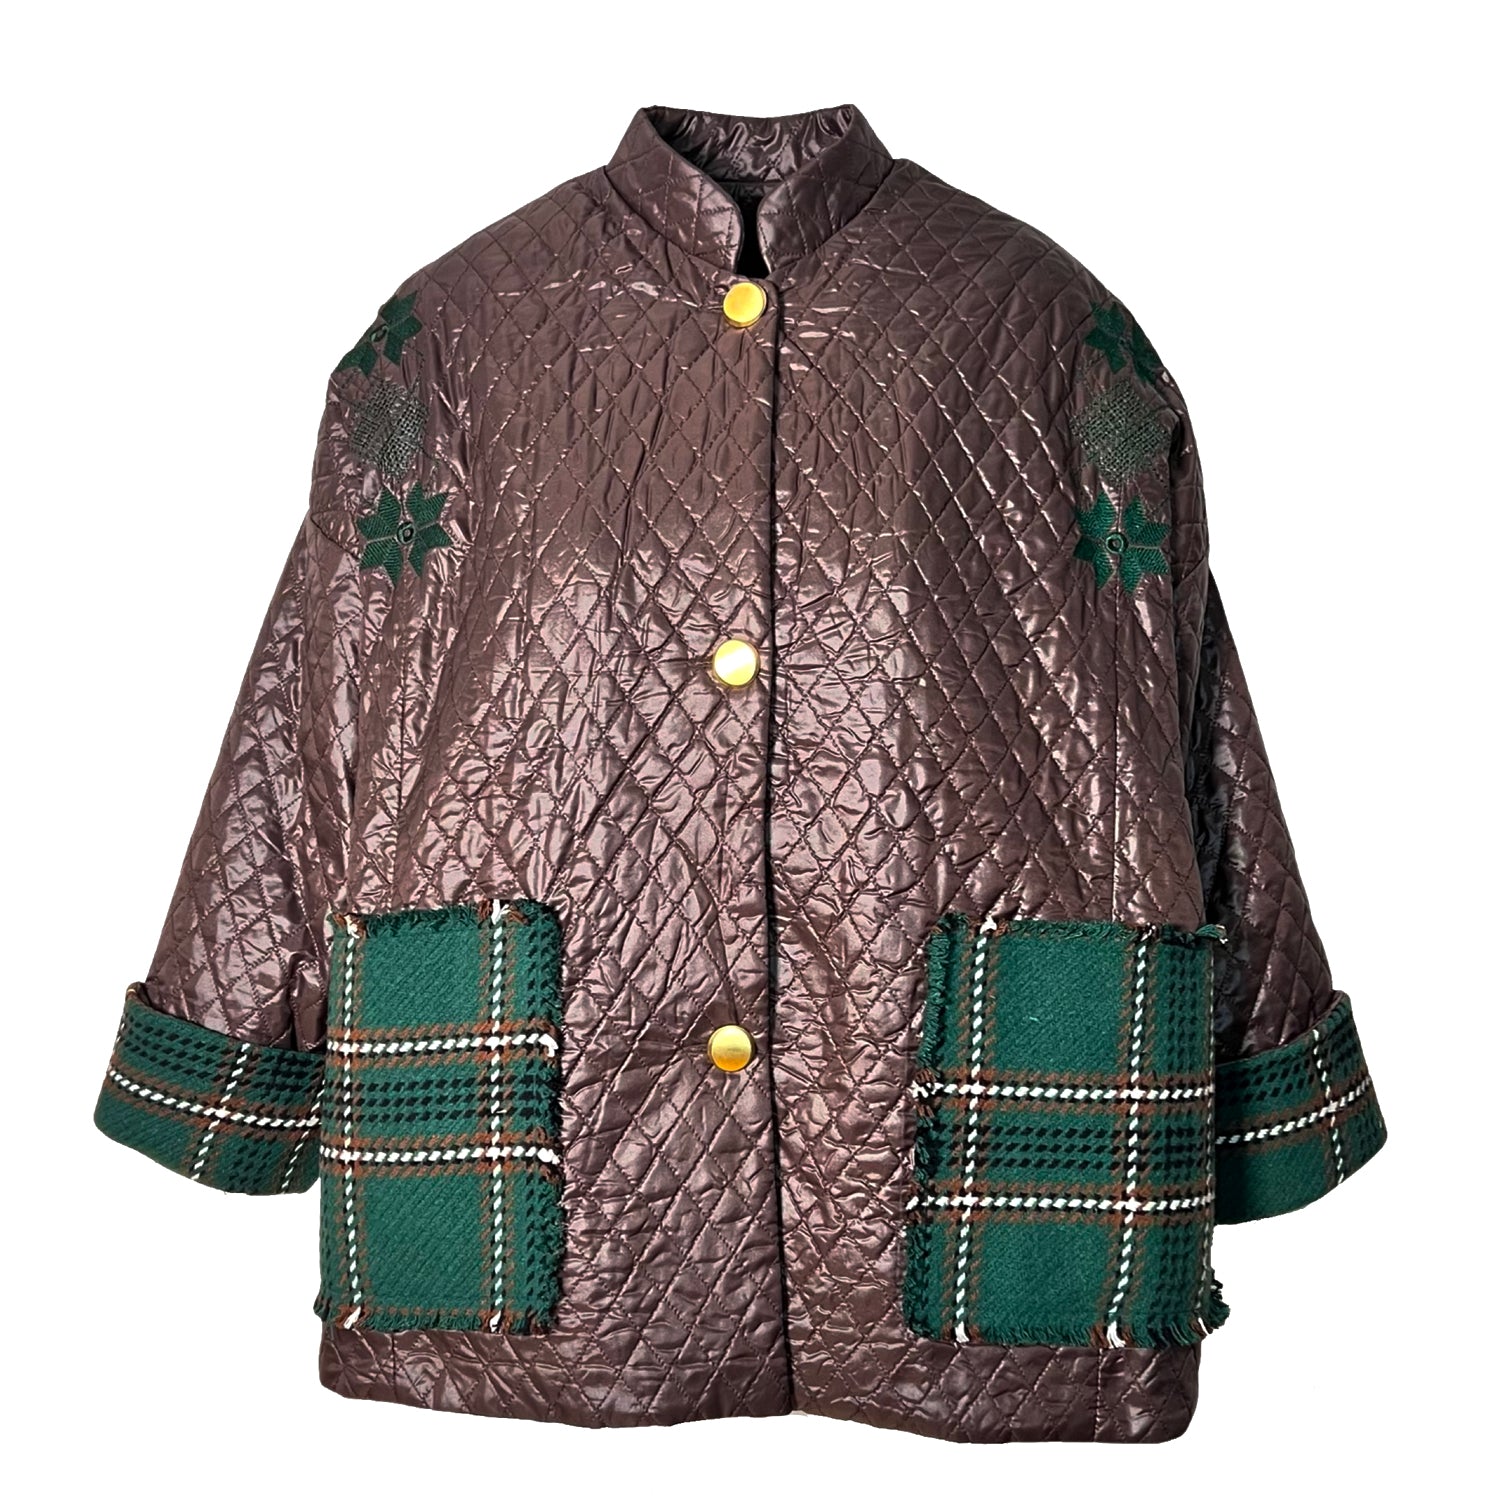 Majorelle Quilted Jacket in Brown & Plaid Pattern